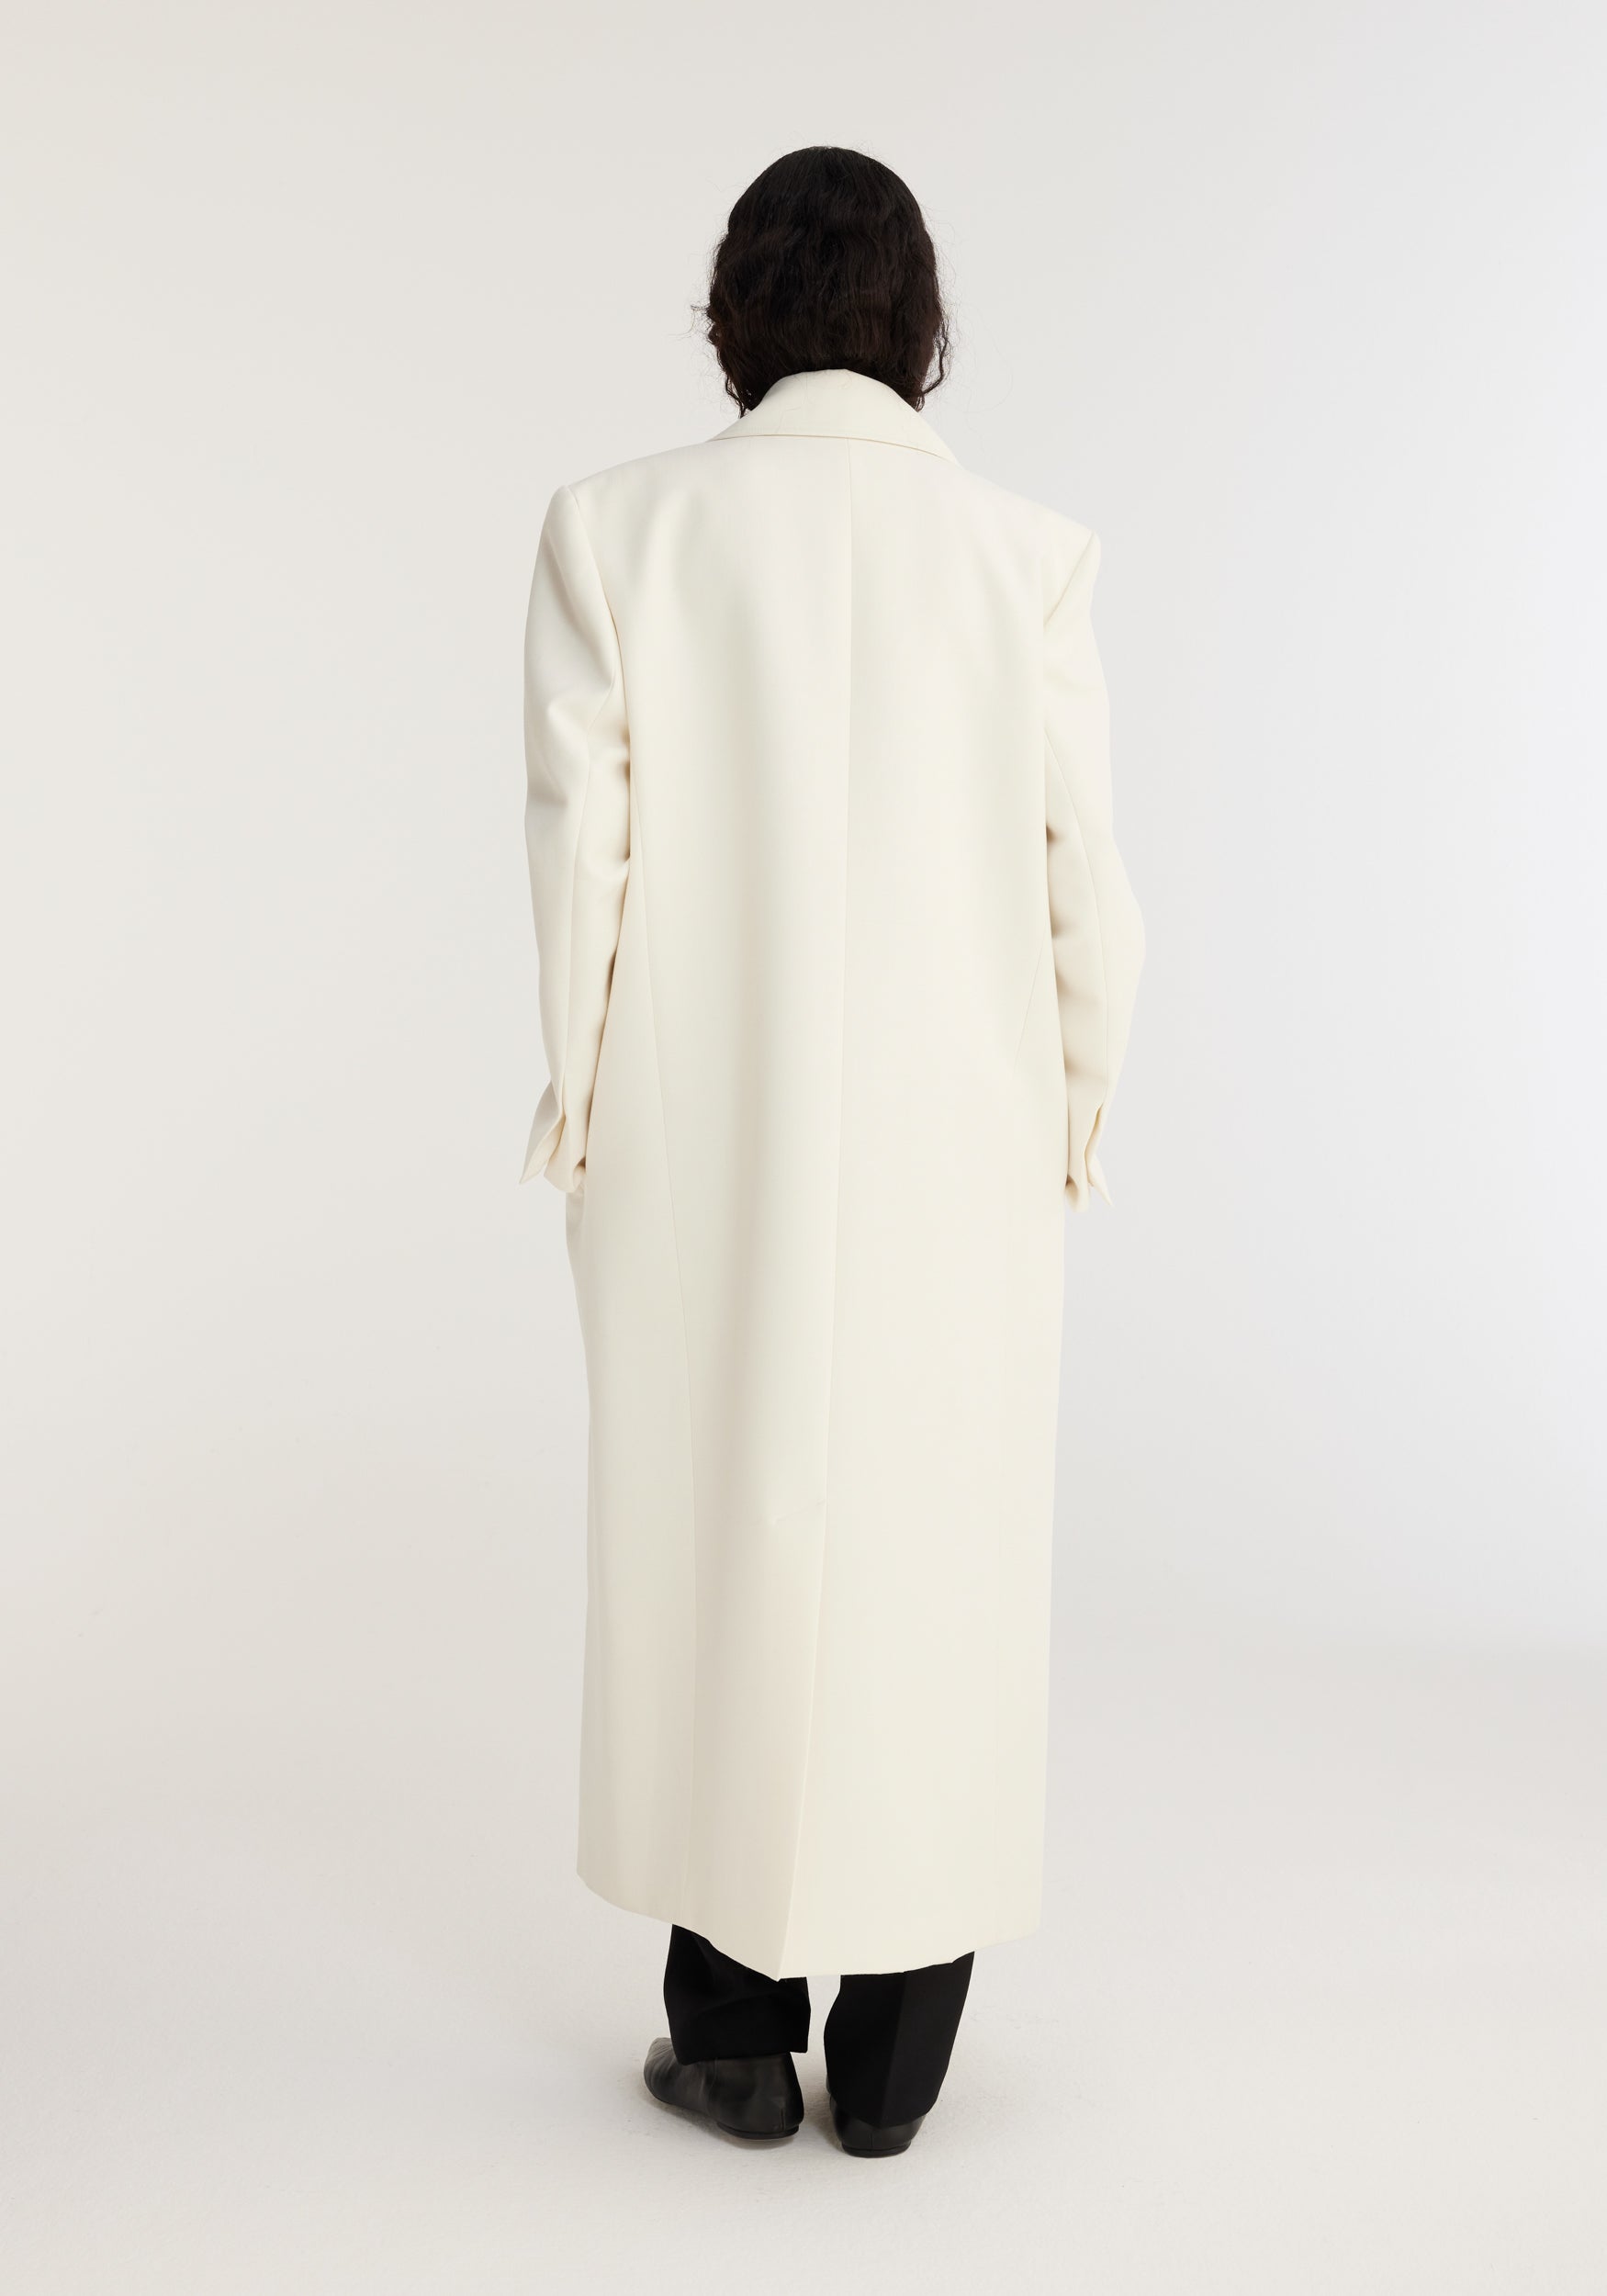 The Rohe Double Breasted Wool Coat in Ivory available at The New Trend Australia